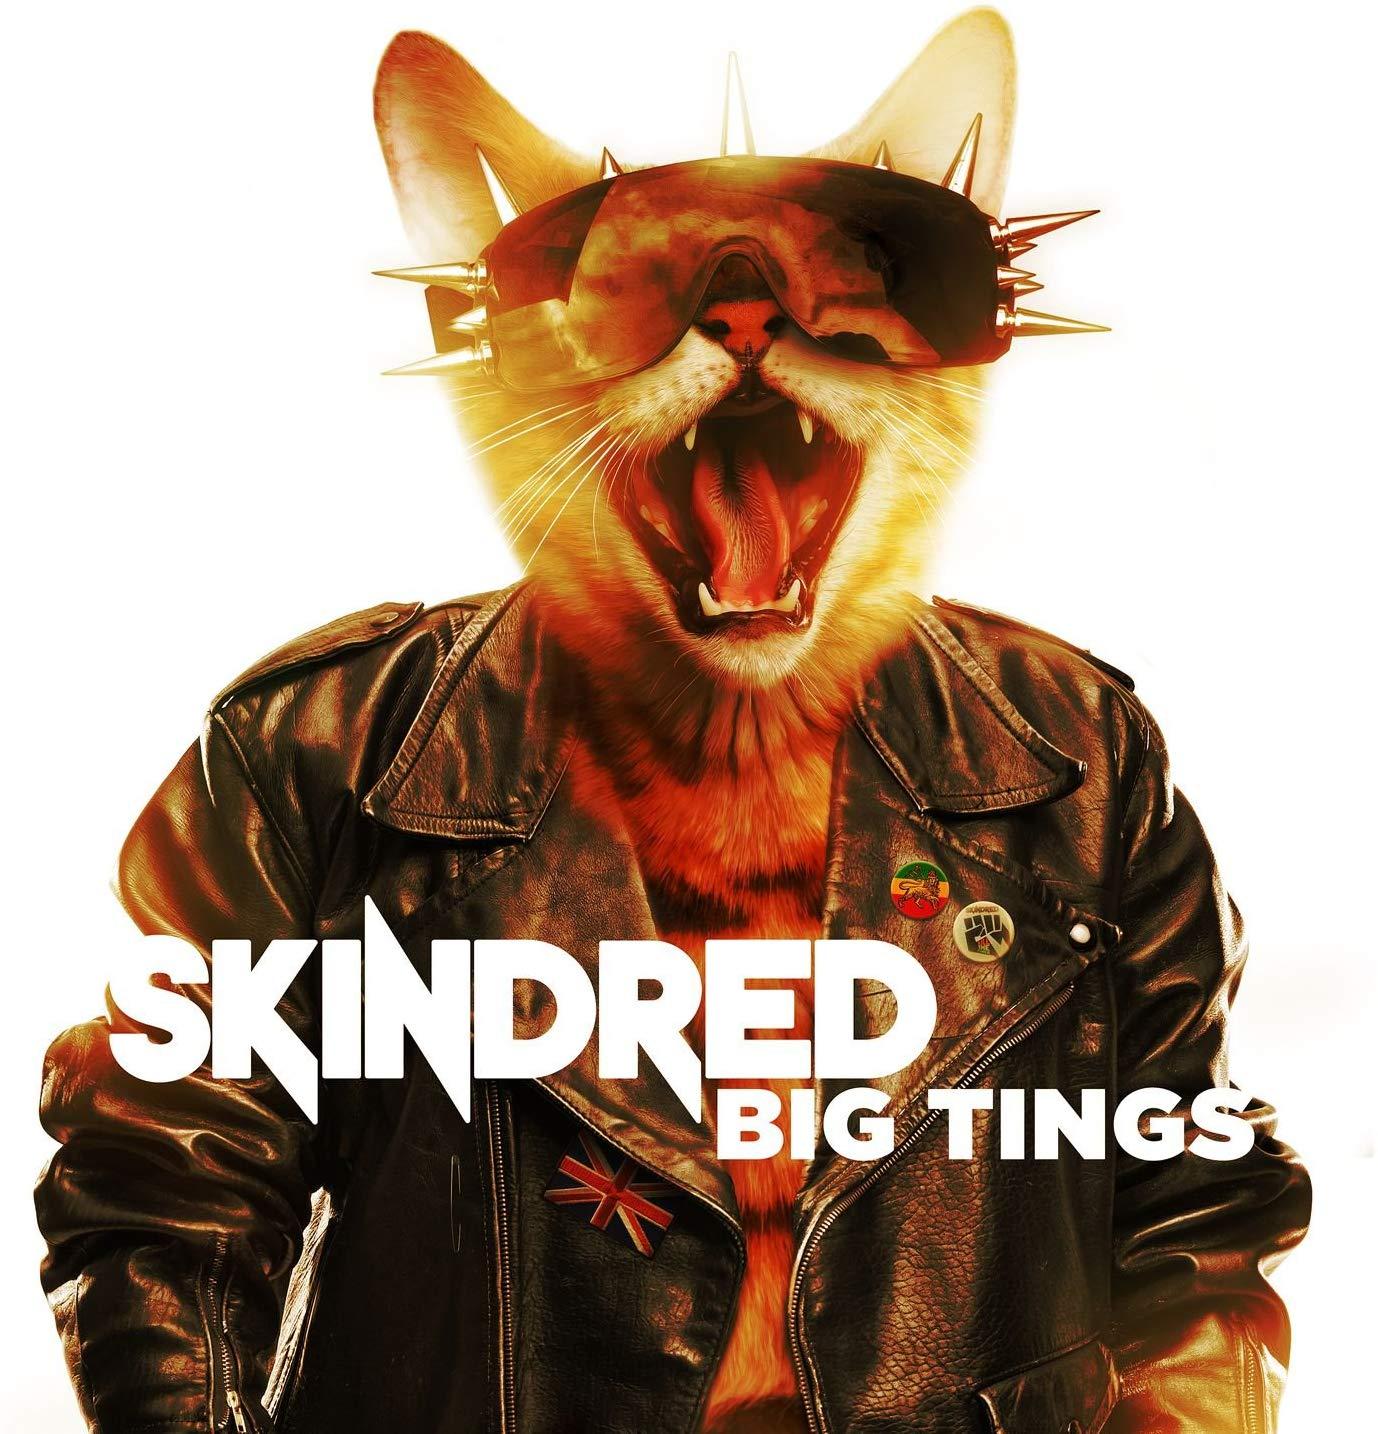 Big Tings / Skindred